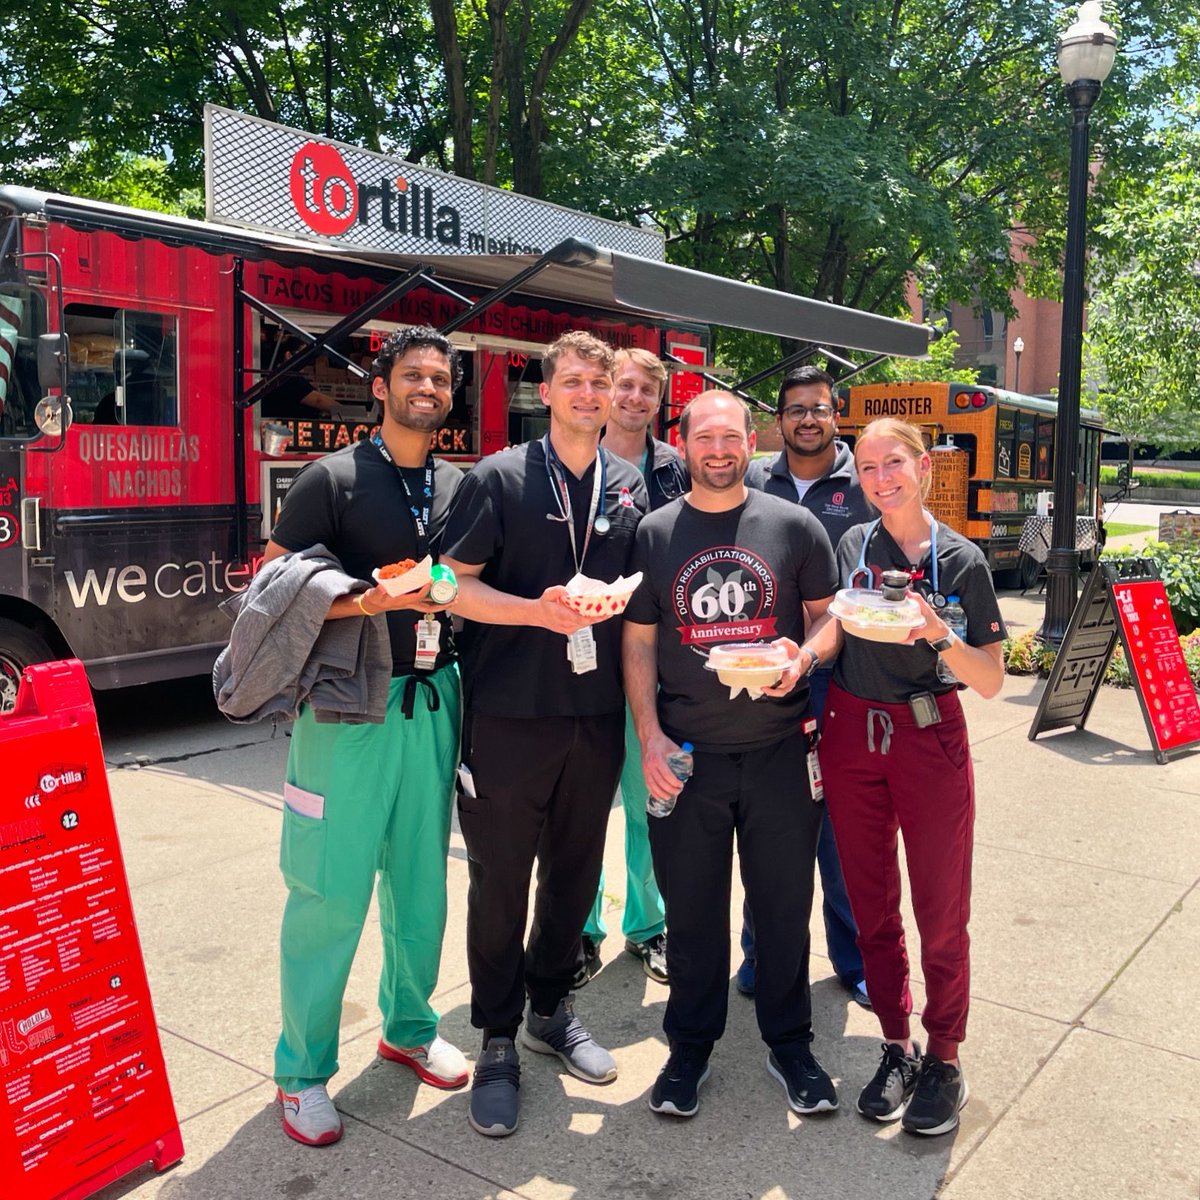 Thank you GME for organizing this food truck festival and providing free meals for our residents! #osuwexmed #pmrresidency